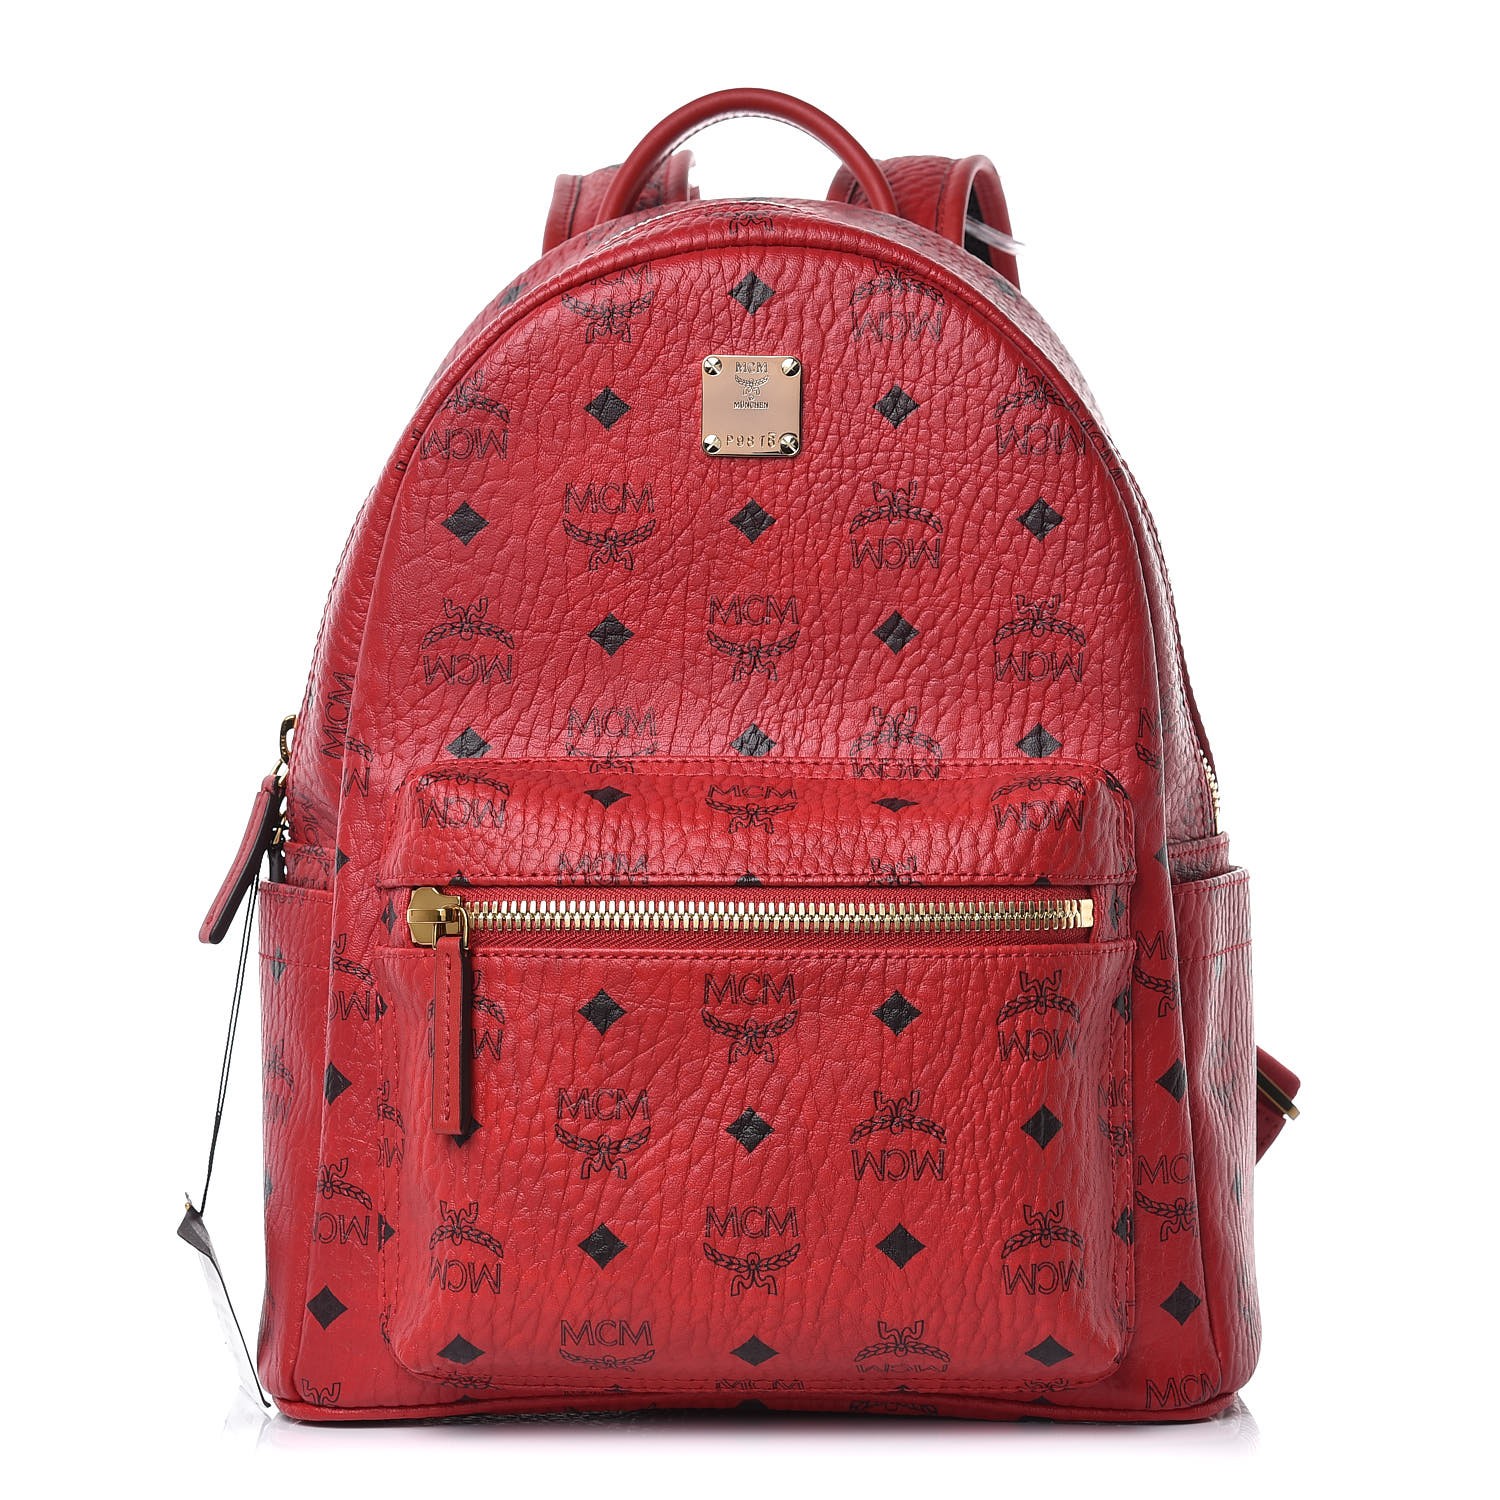 MCM Visetos Small Stark Backpack Ruby Red 350892 | FASHIONPHILE